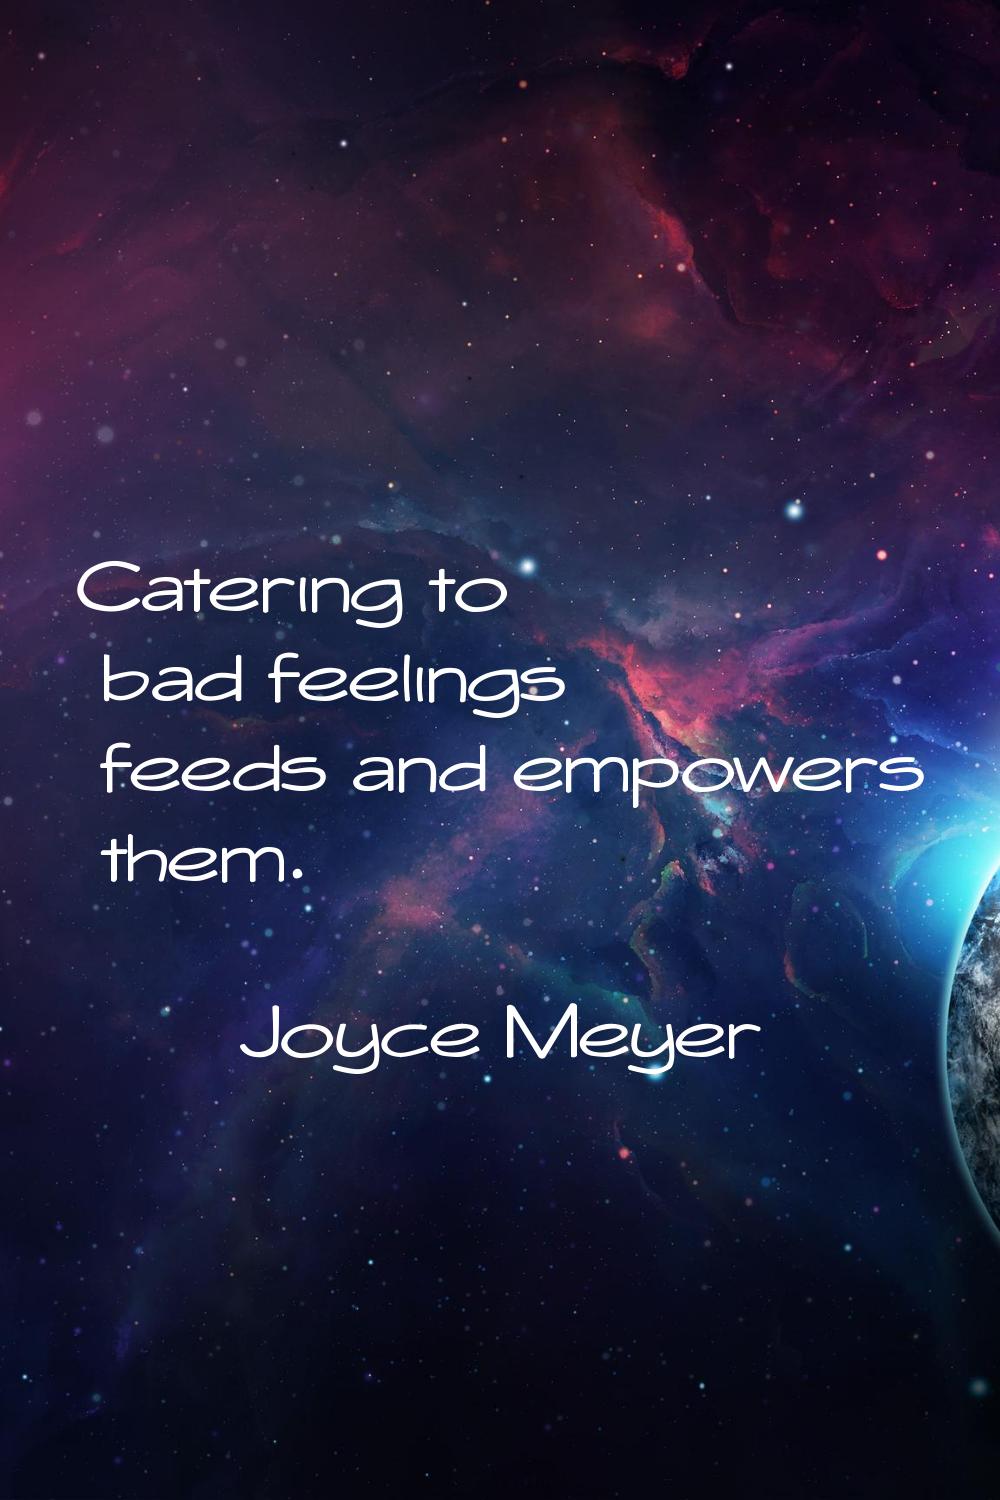 Catering to bad feelings feeds and empowers them.